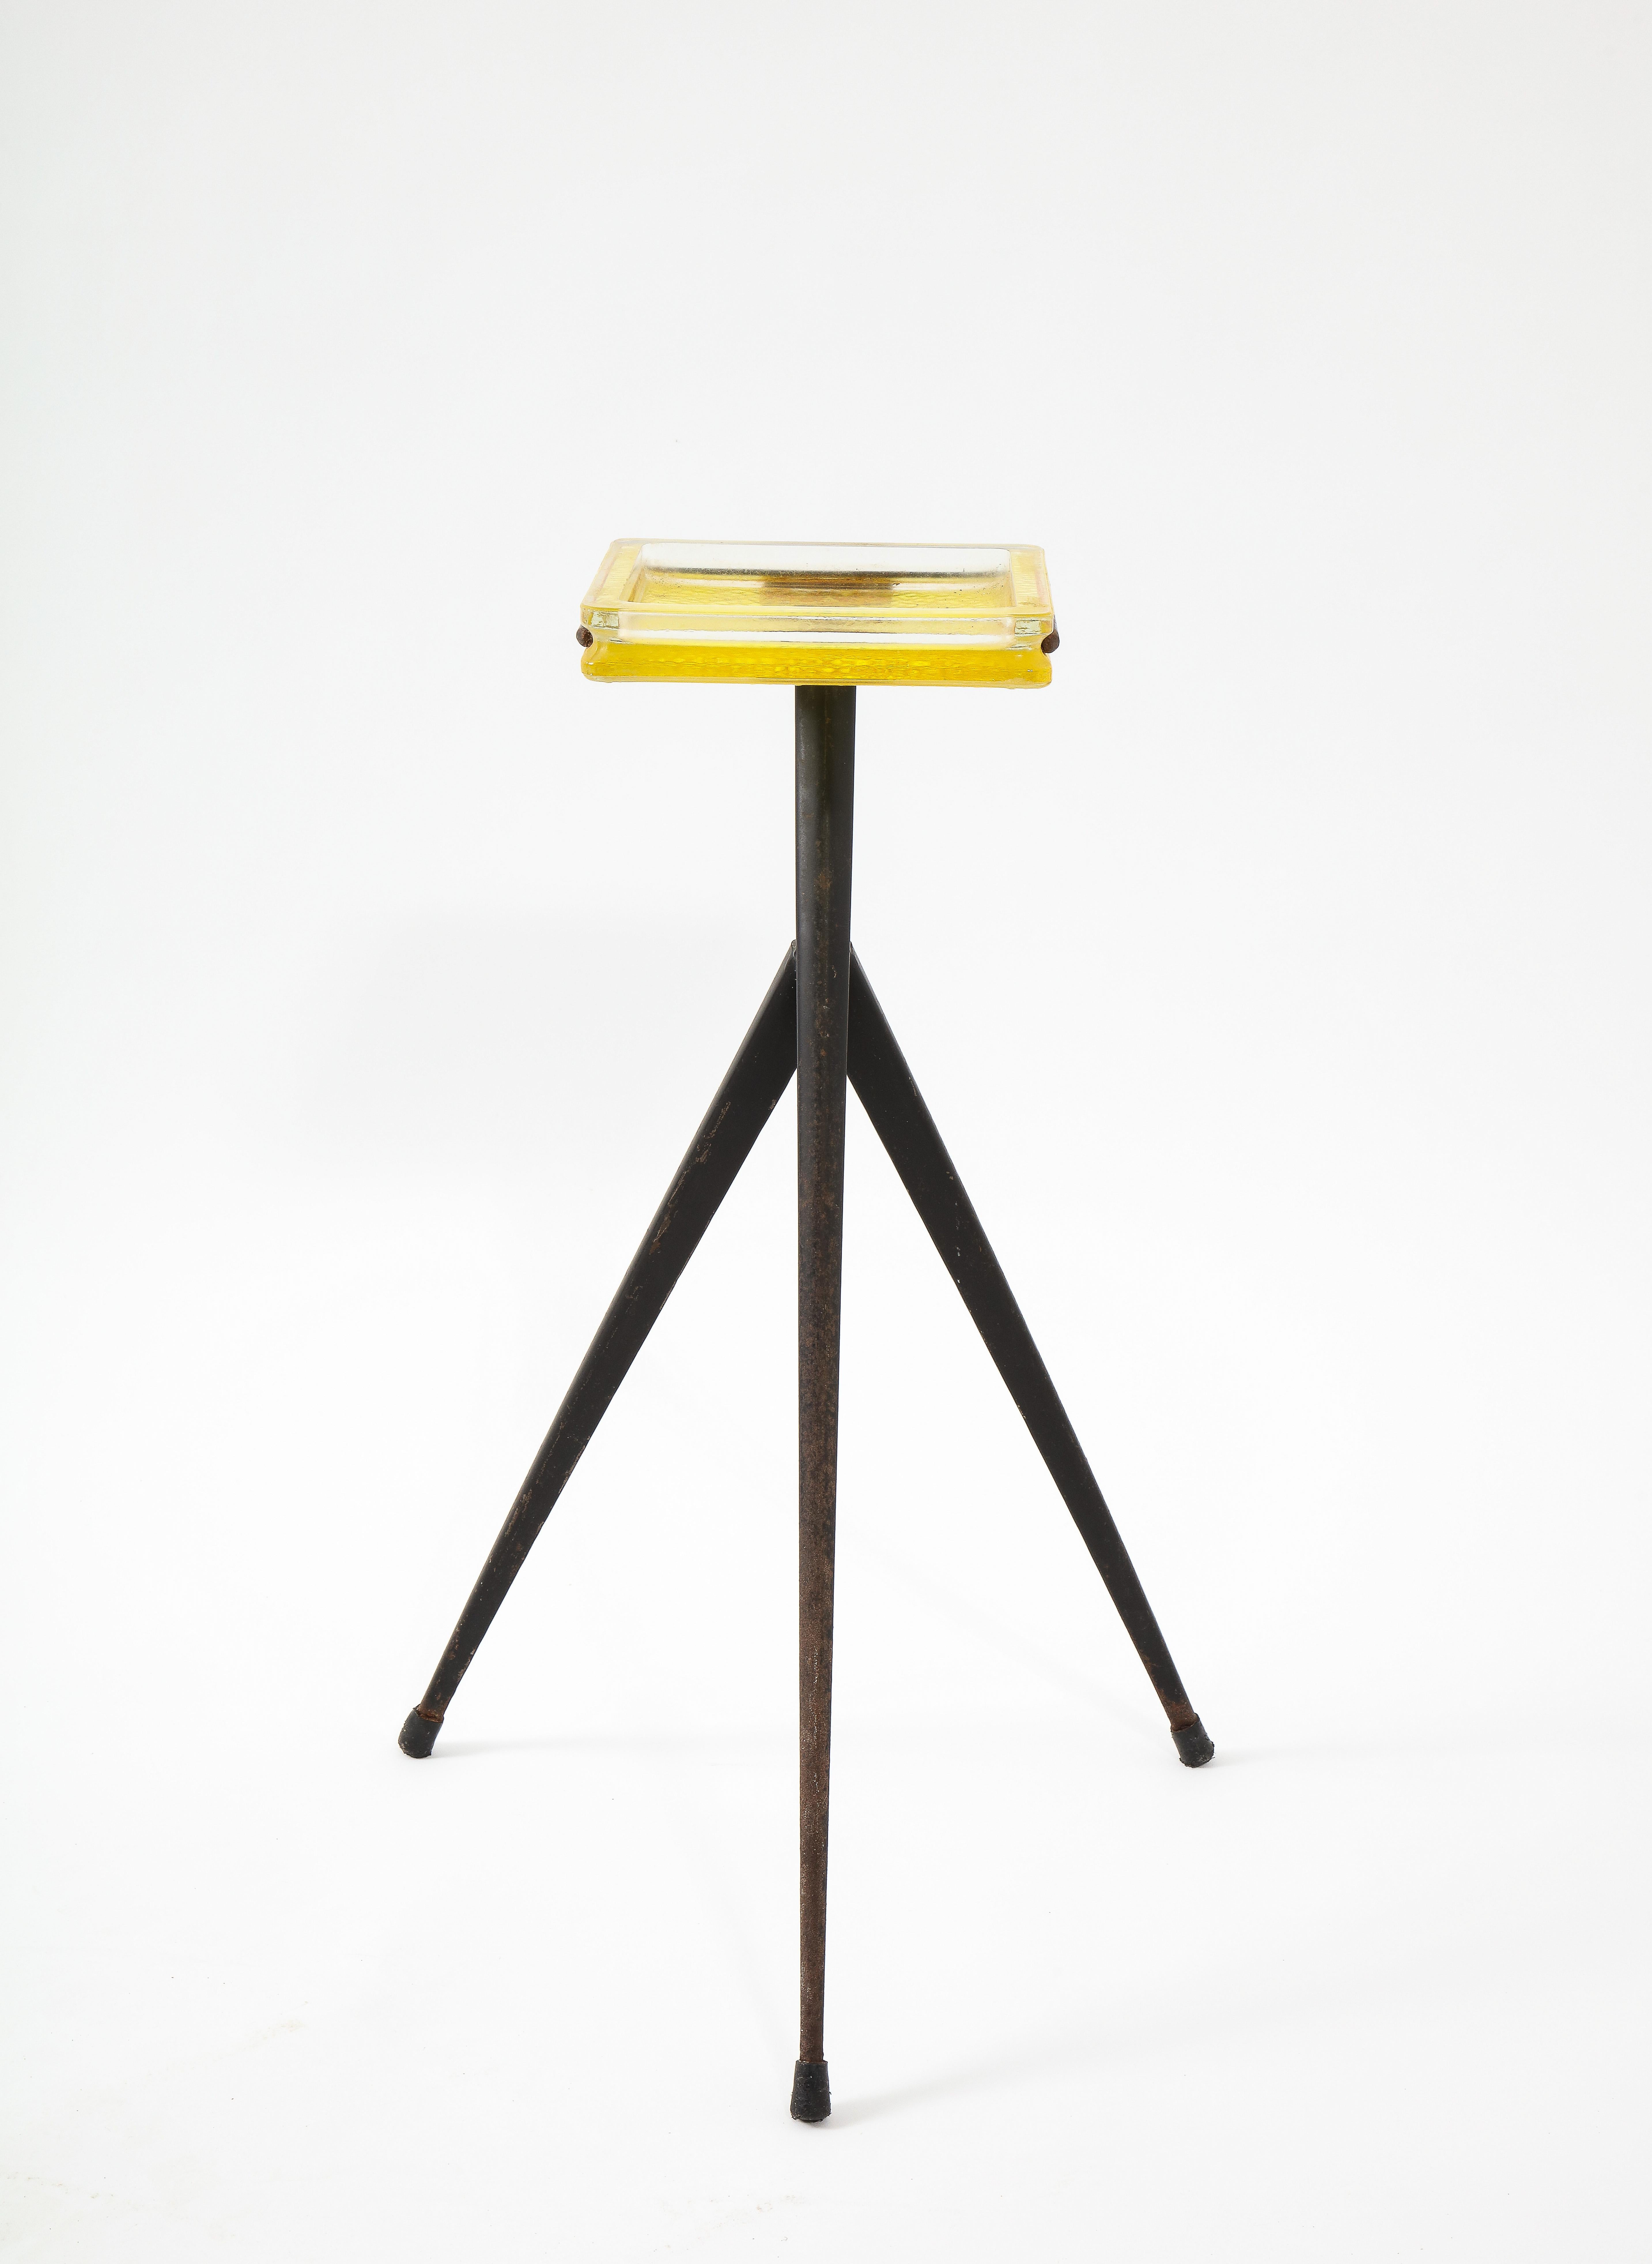 A drink stand in folded steel with a yellow glass tile top.